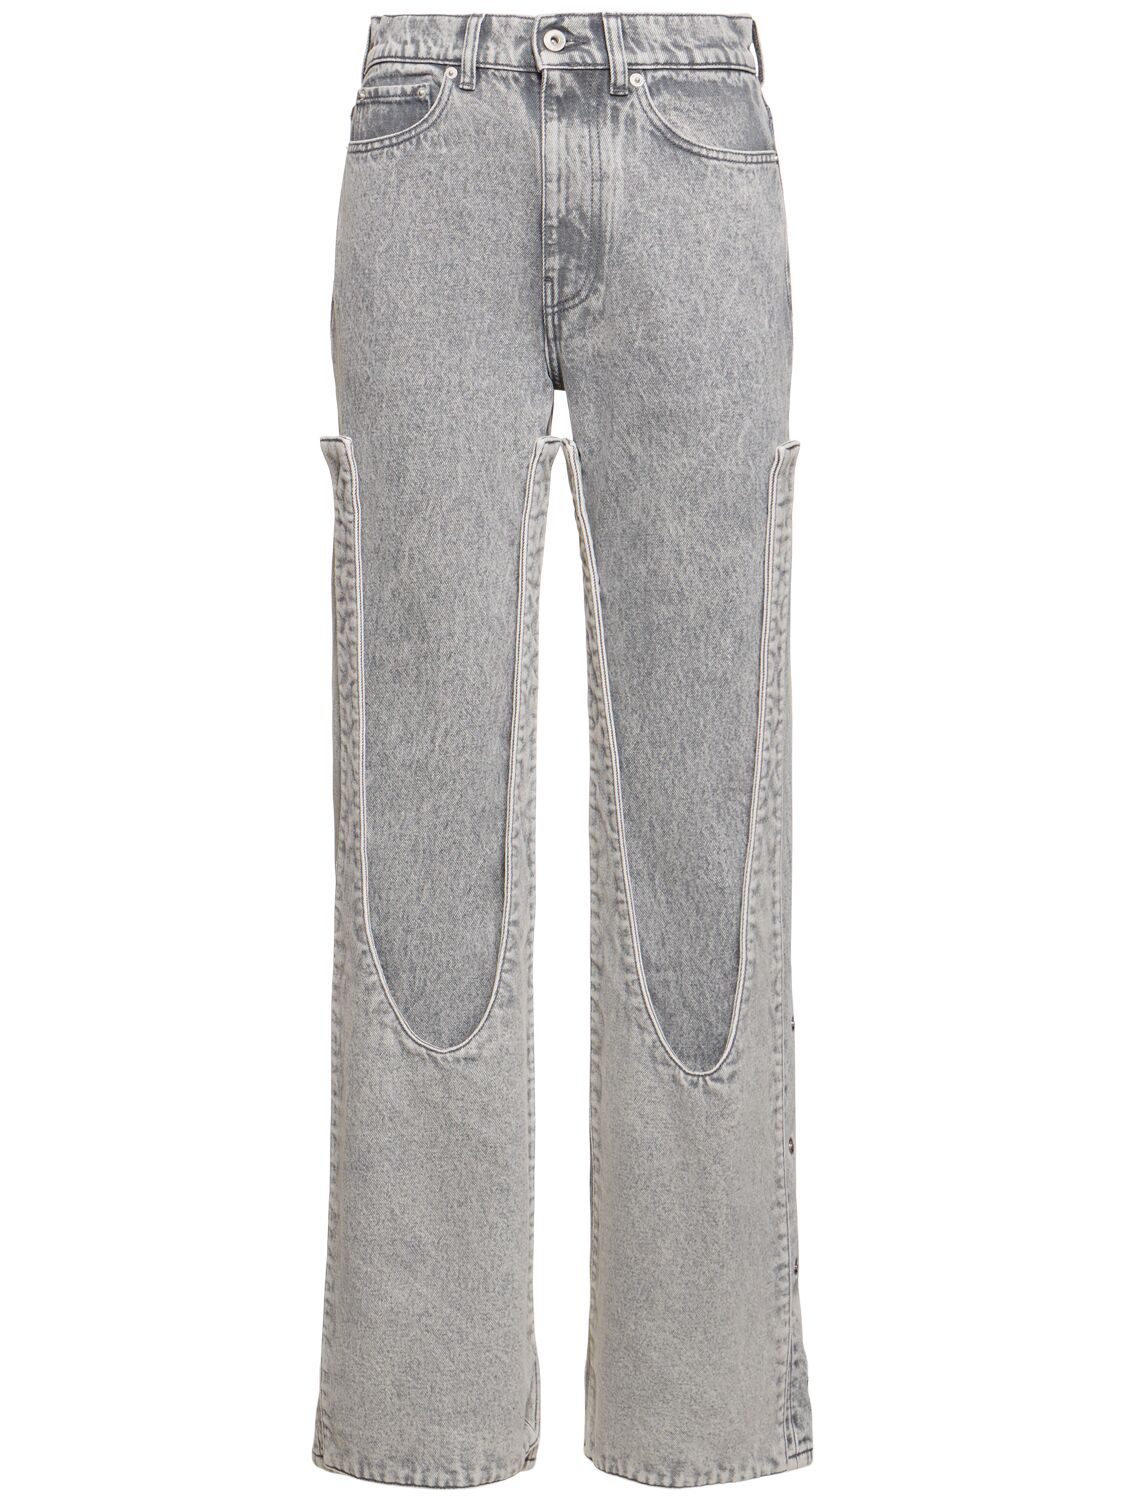 Y/project Denim Patchwork High Rise Flared Jeans In Washed Grey